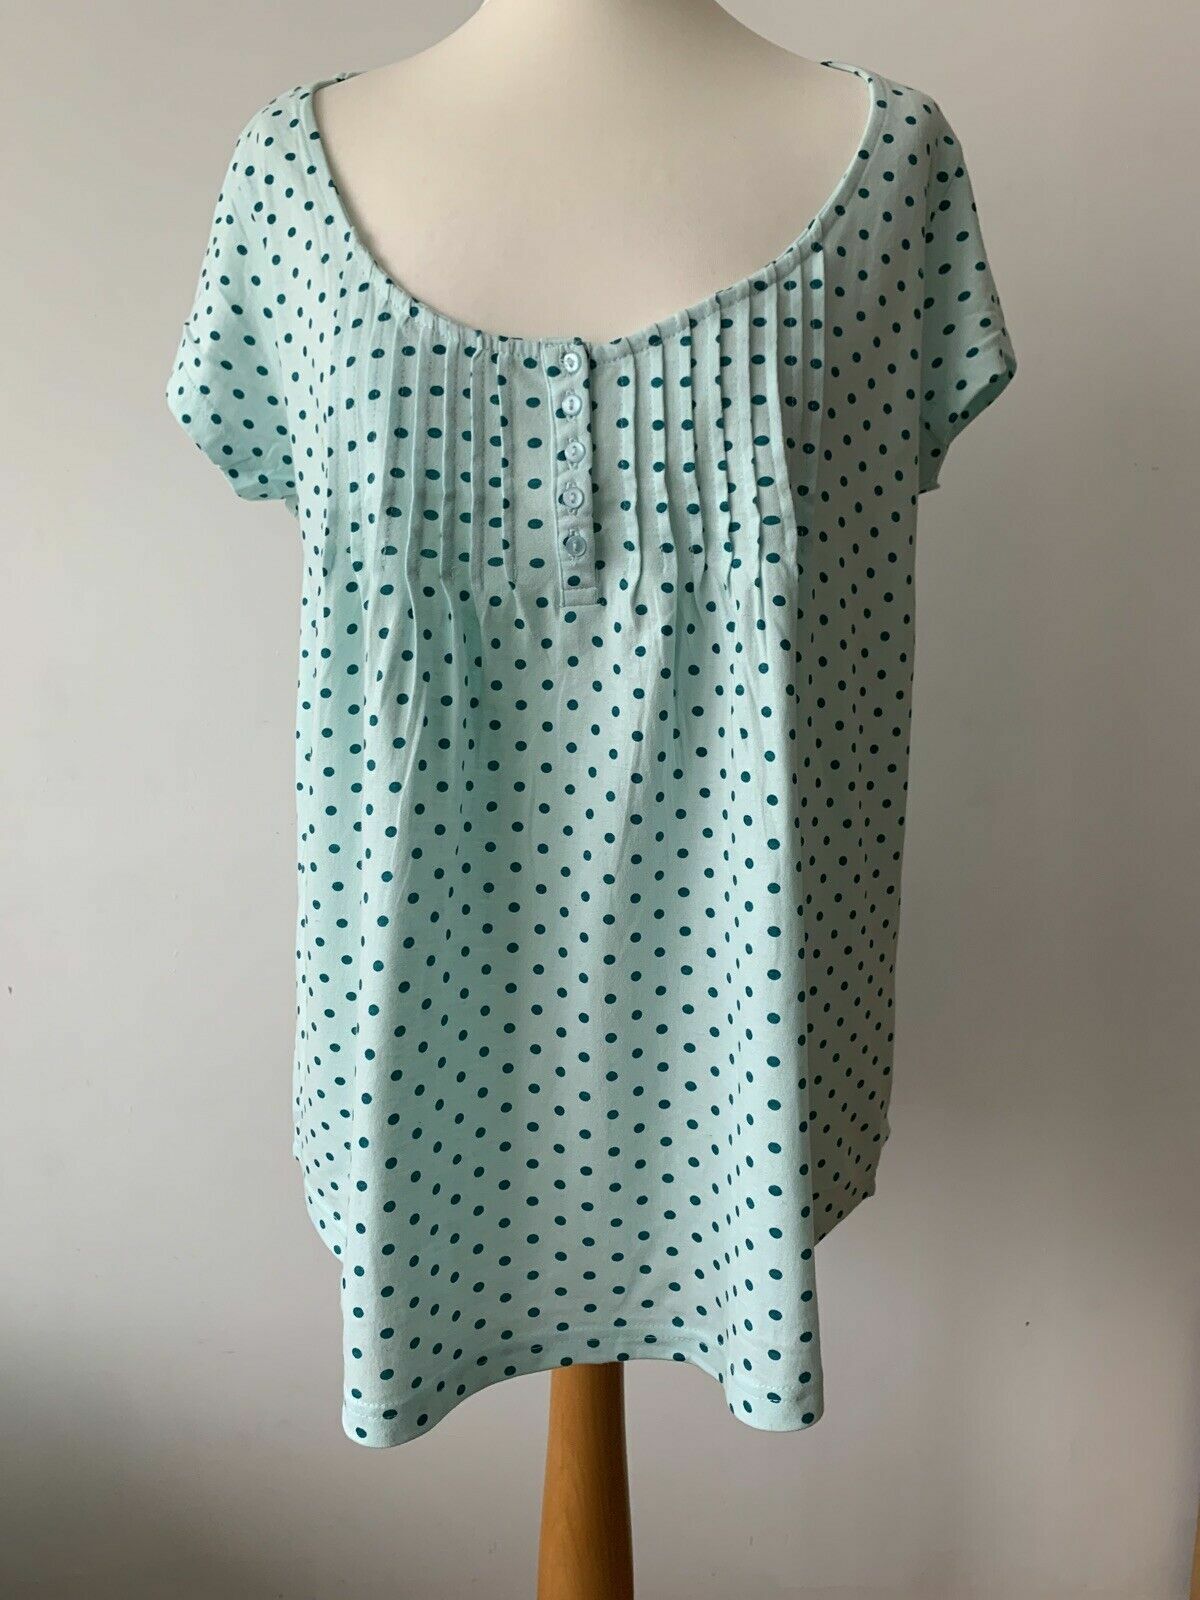 Blancheporte Light Teal Polka Dot Top Cotton Size 16 - 18 Pit to Pit 19.5"